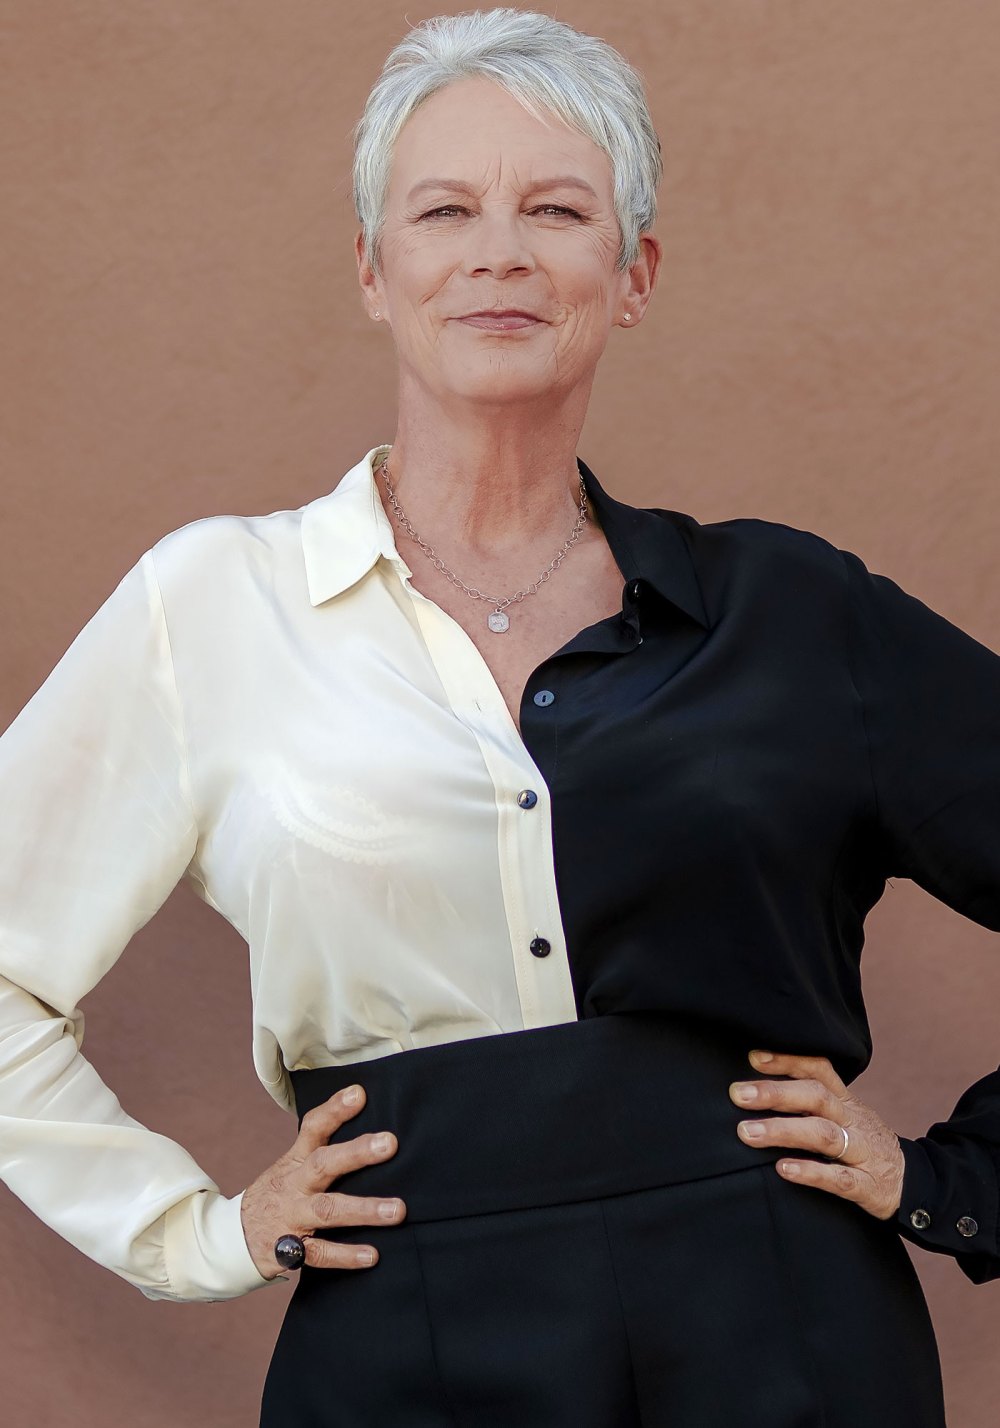 Jamie Lee Curtis Is Against Plastic Surgery: It Made Me ‘Feel Worse’